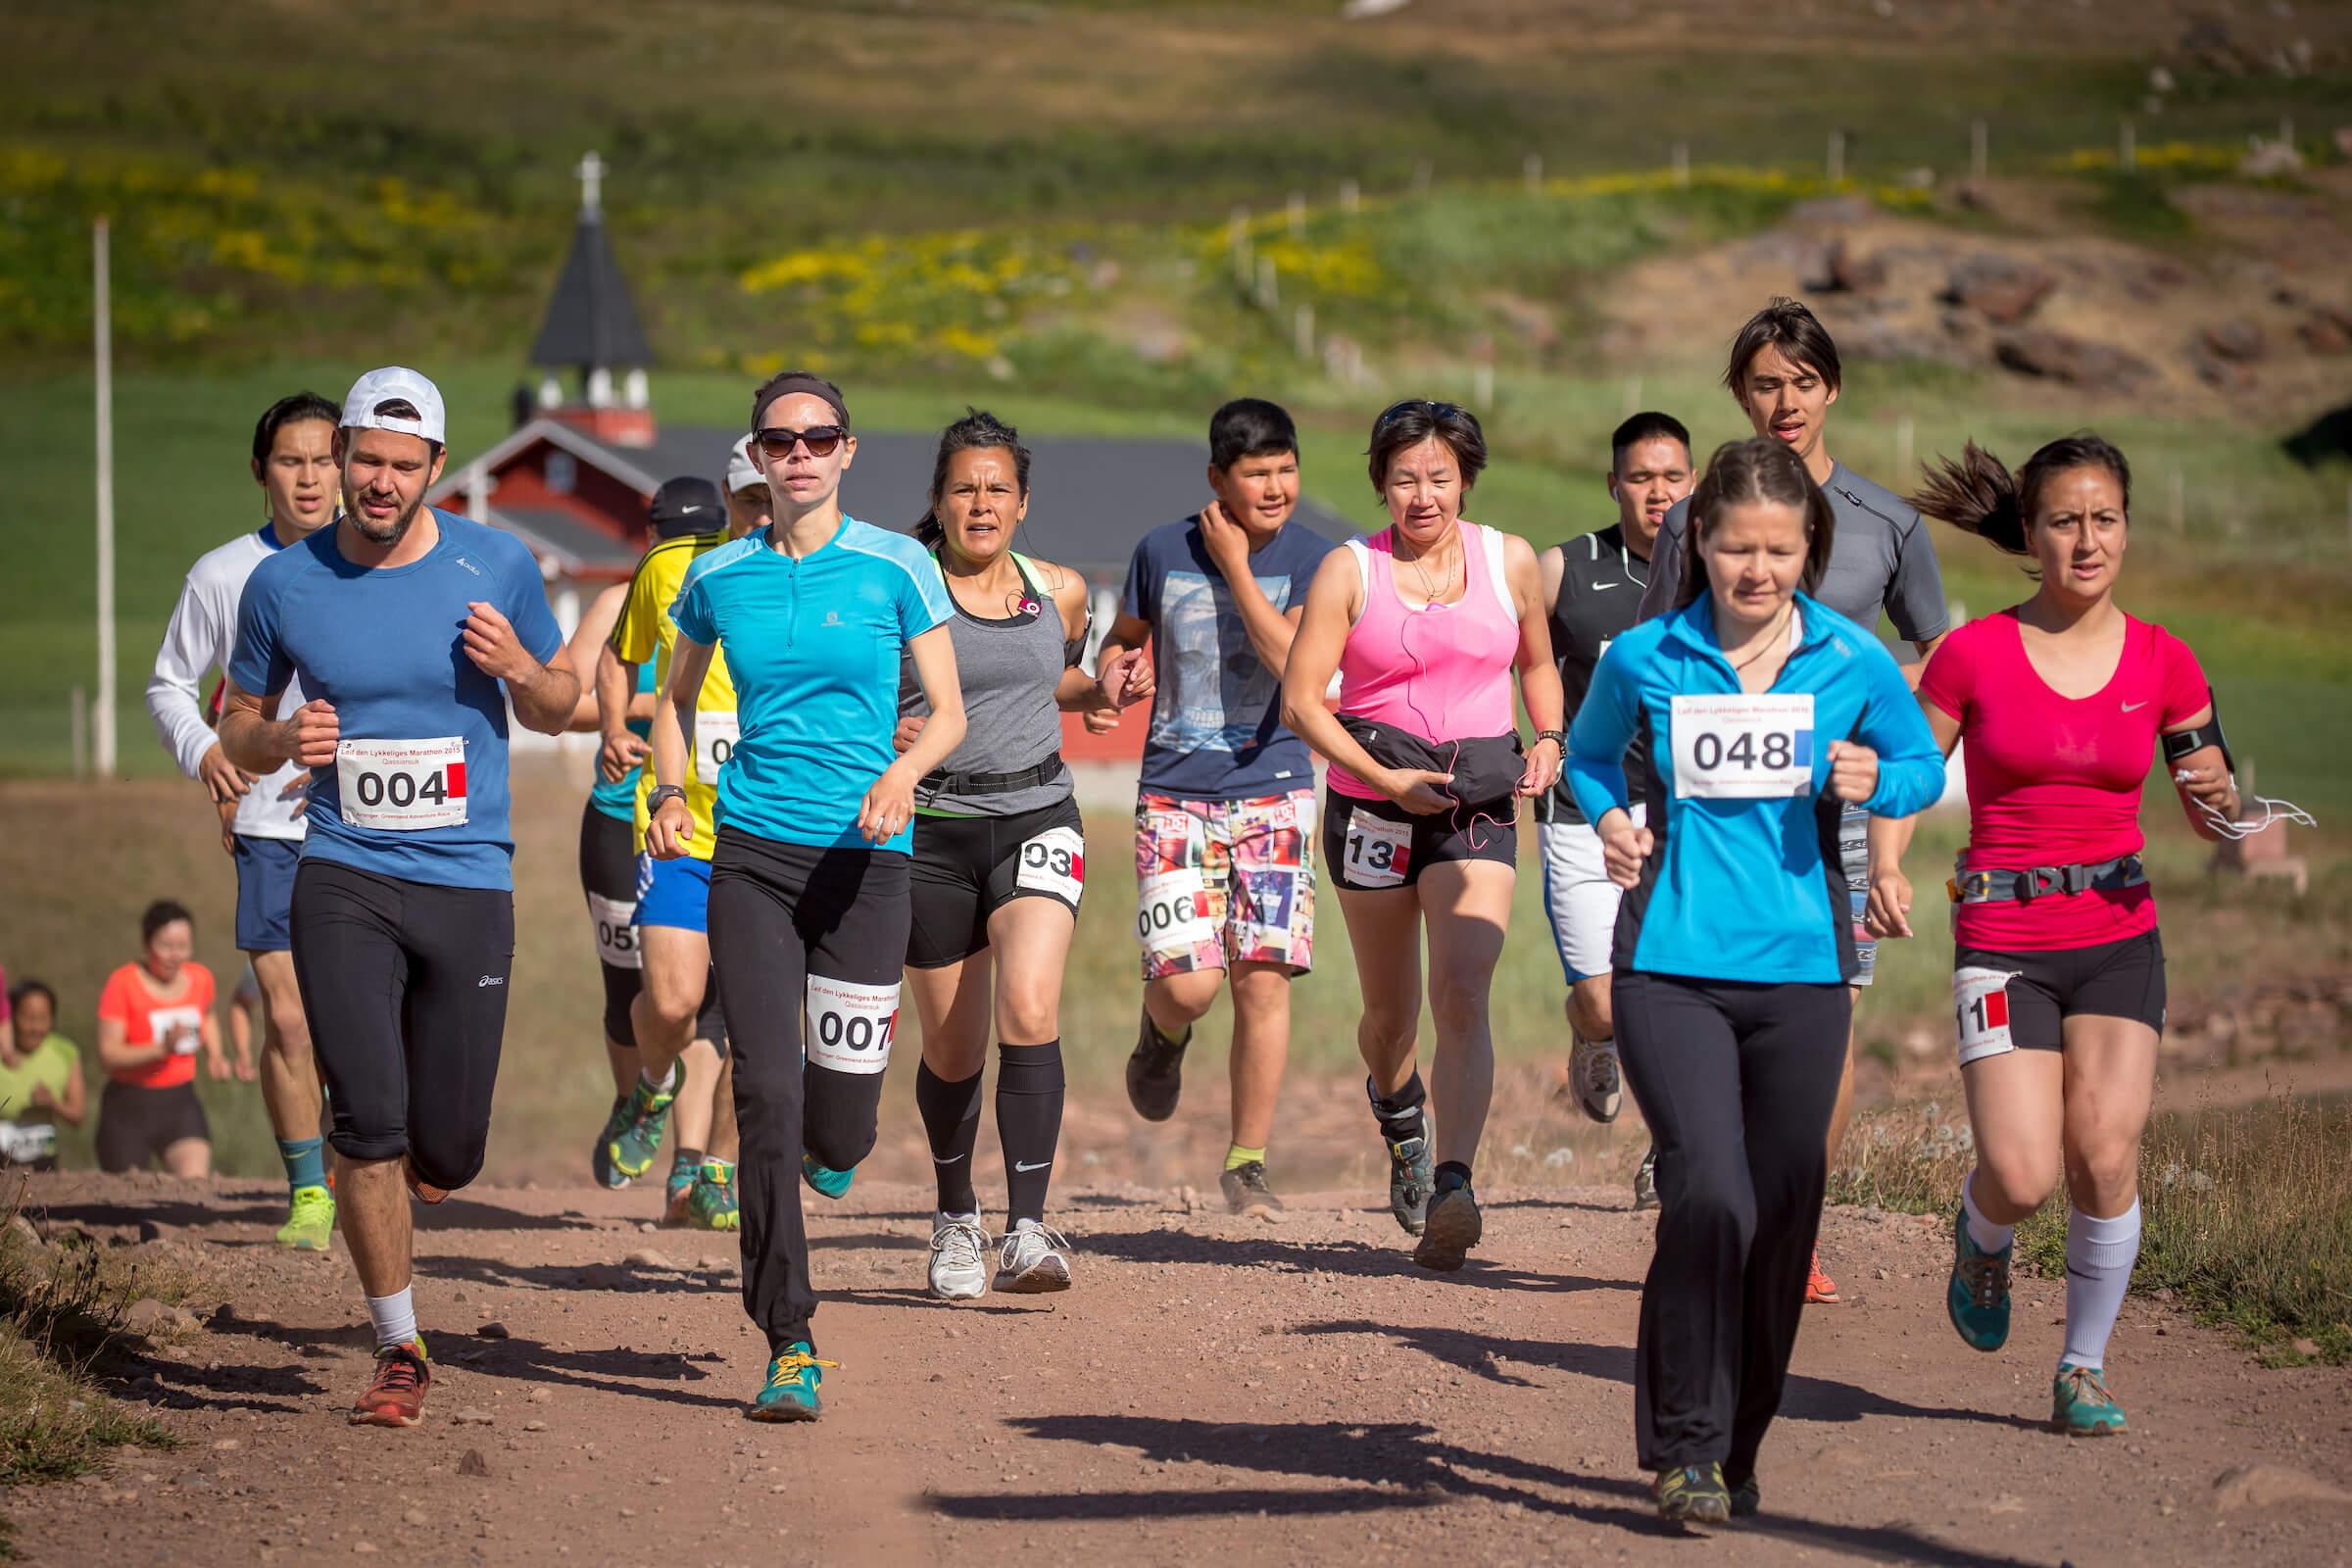 Participants at the Leif den Lykkeliges Marathon in Qassiarsuk in South Greenland. By Mads Pihl